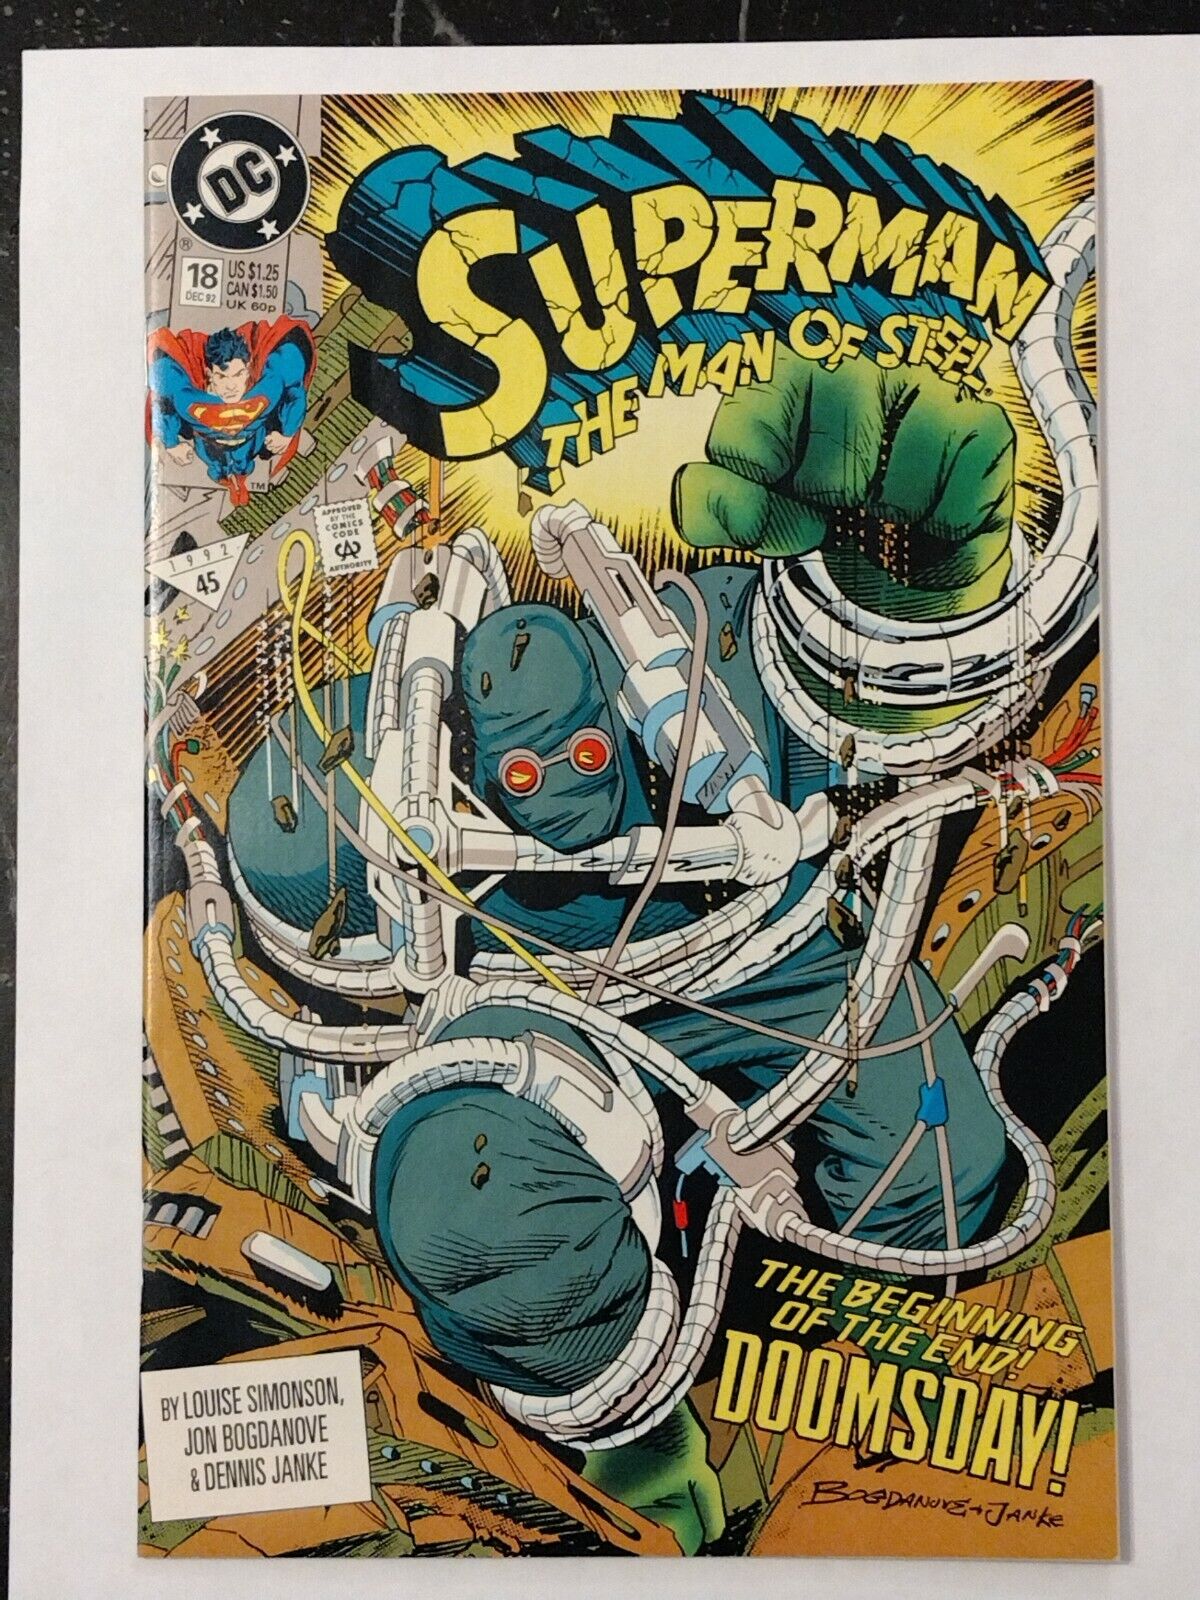 Supetman:The Man Of Steel #18 This is it. A PERFECT GEM MINT 10.0 not a 9.8 HOT